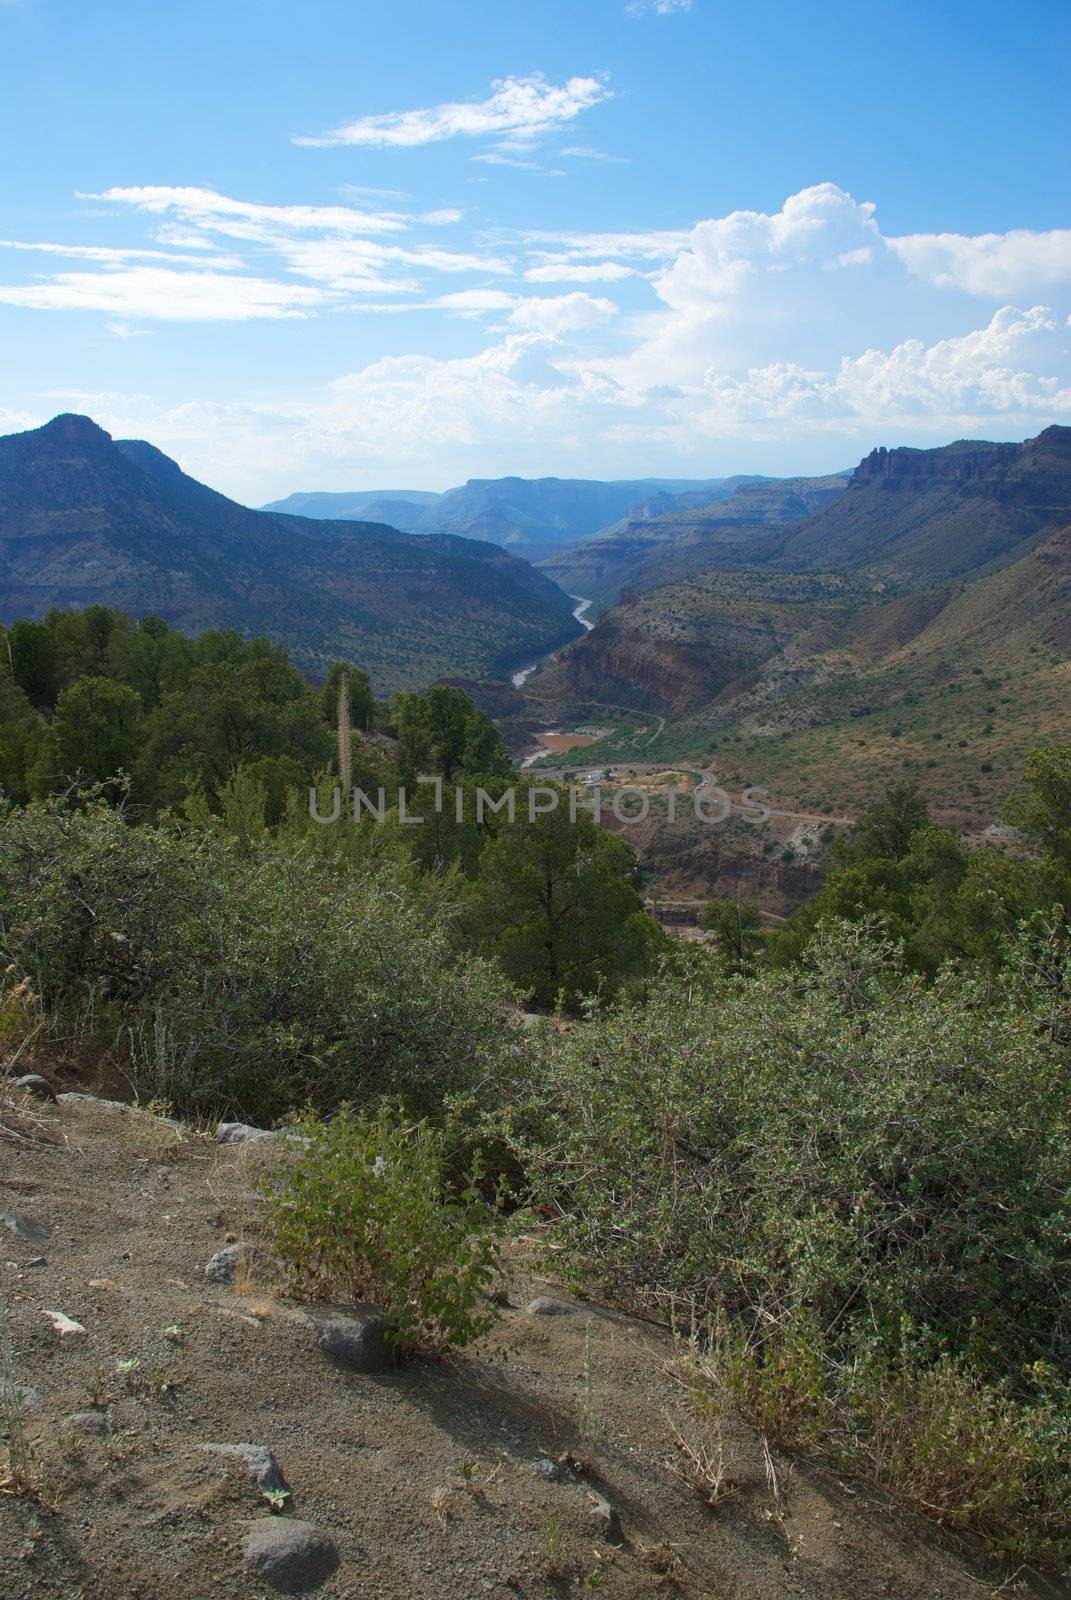 A beautiful desert canyon with a river running through it and a blue sky with white clouds and green plants